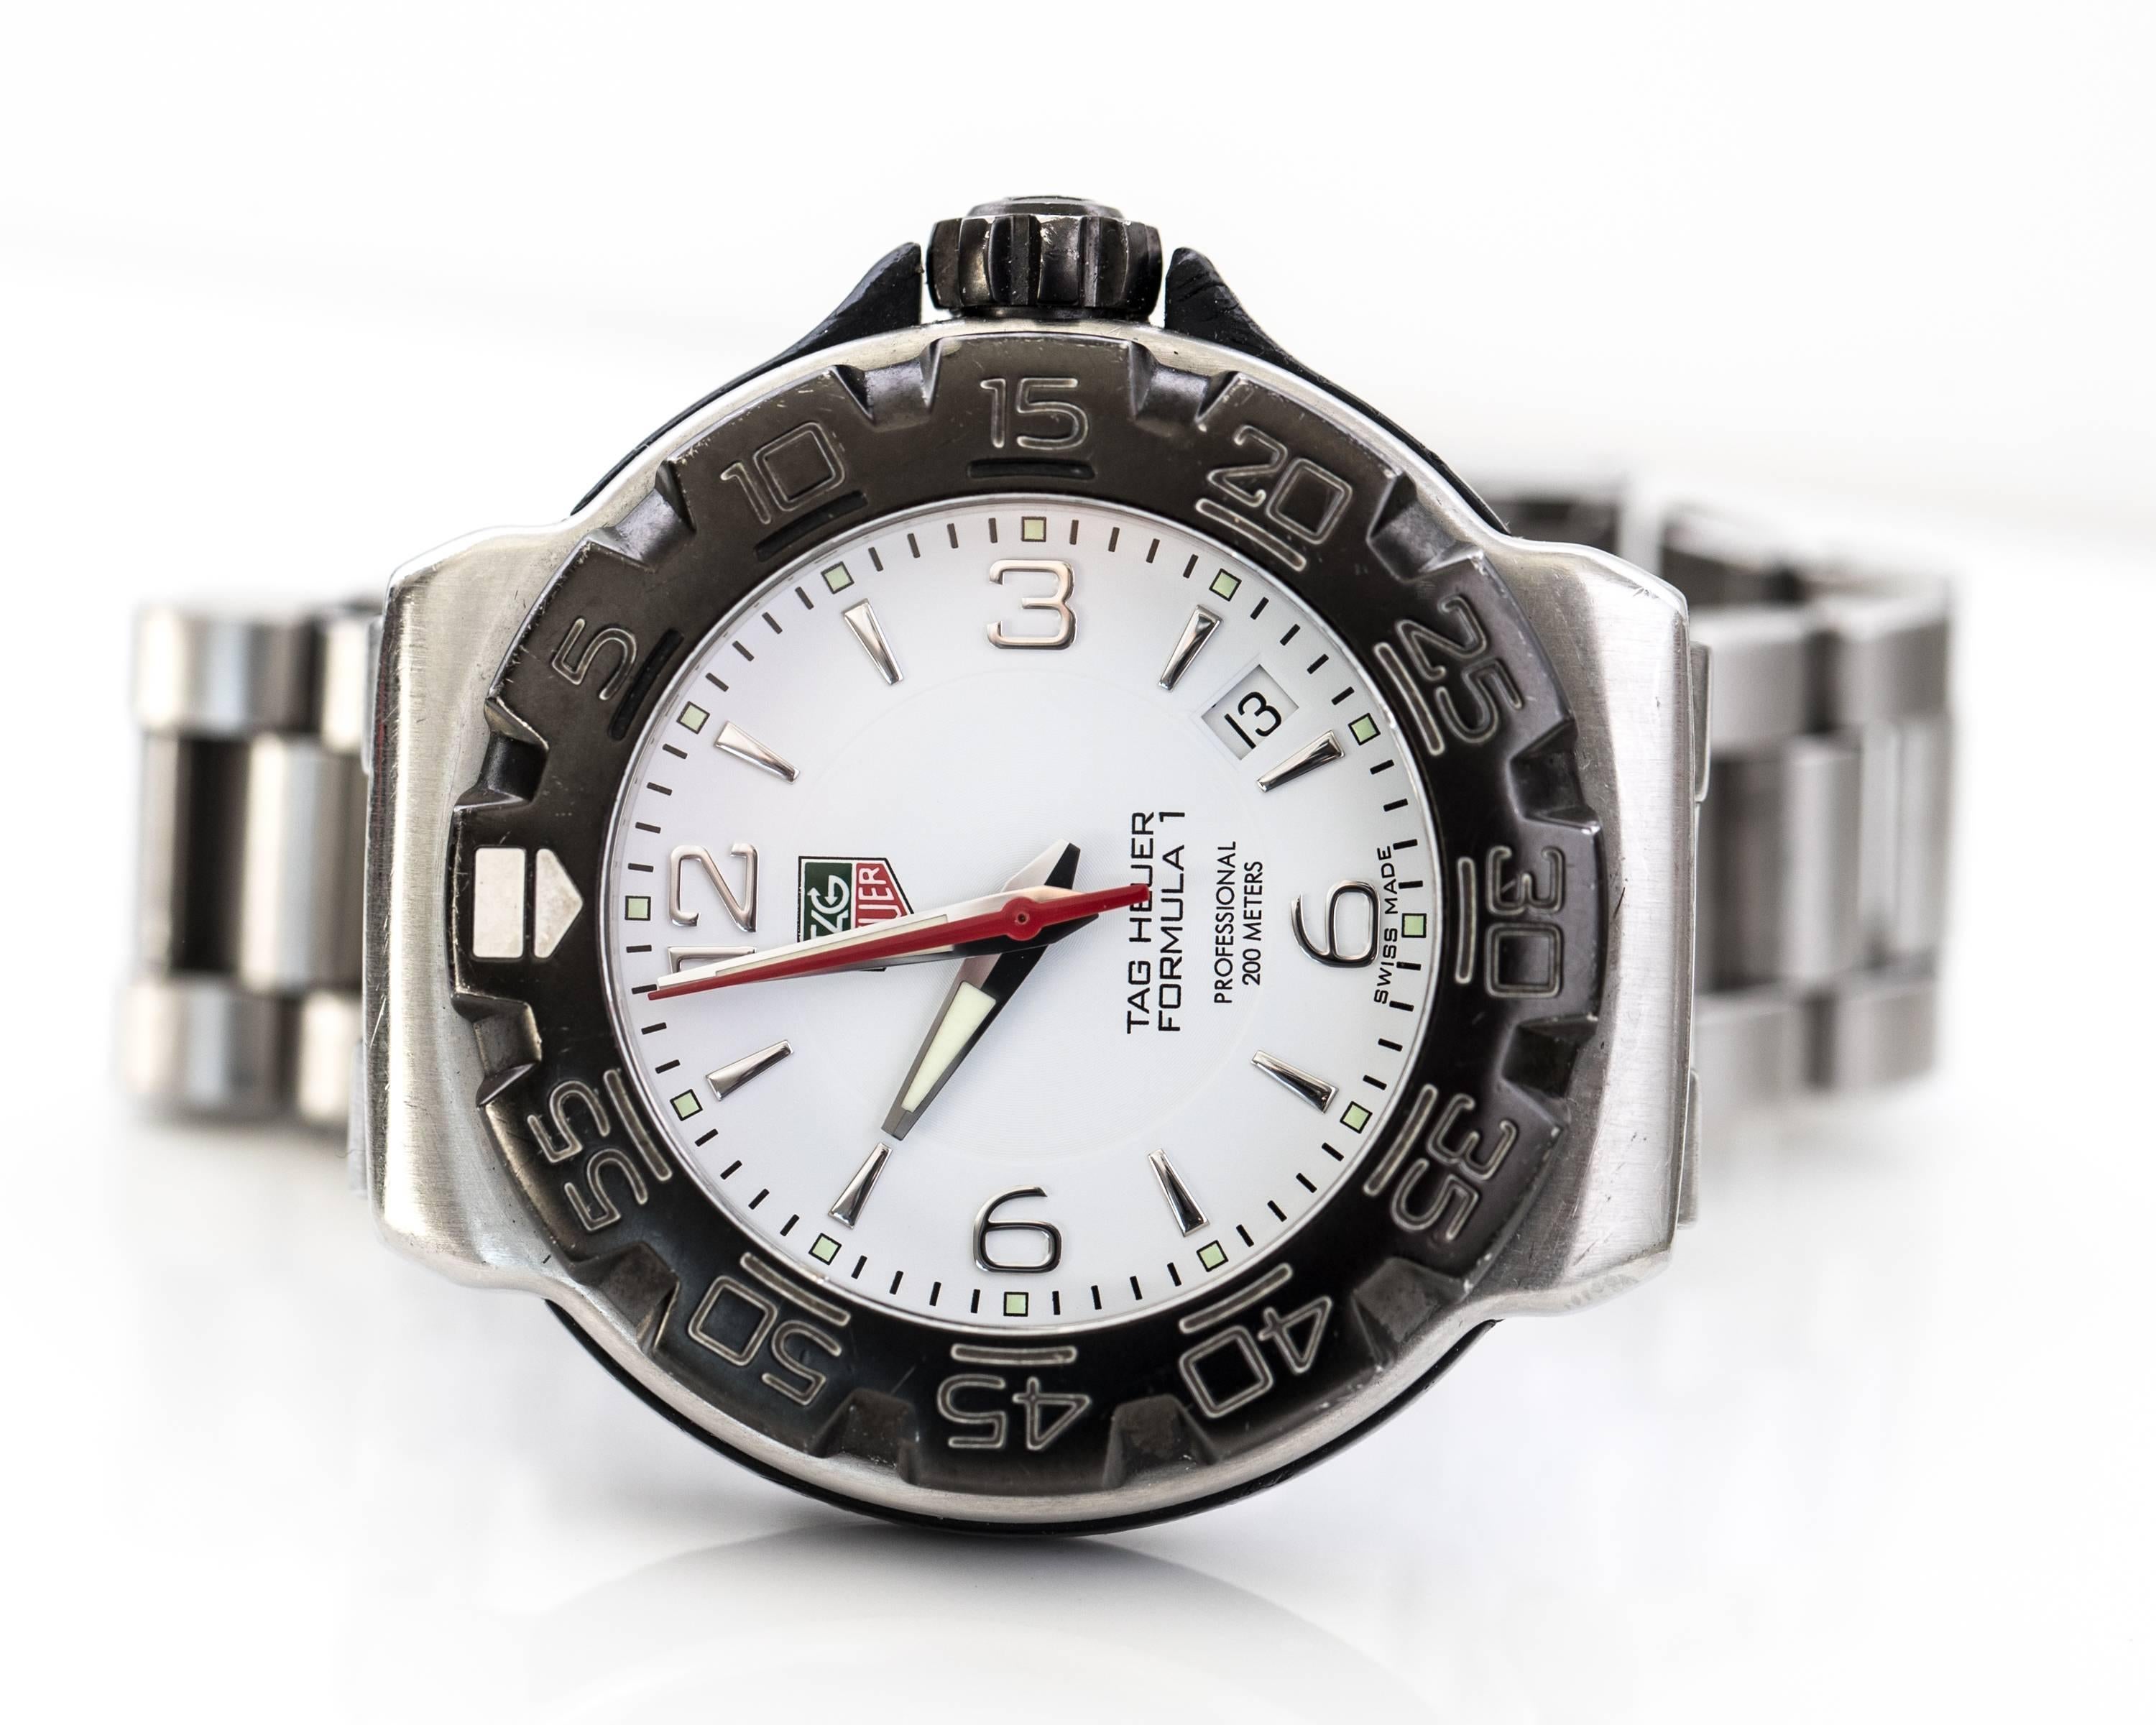 2007 Tag Heuer Formula 1 Stainless Steel 40 mm Watch with Stainless Steel Bracelet. This Ultra Accurate Watch features a White Dial with Black Rotating Bezel, Red Central Seconds Hand,  Arabic and Stick Dial with silver Hour Markers and silver and